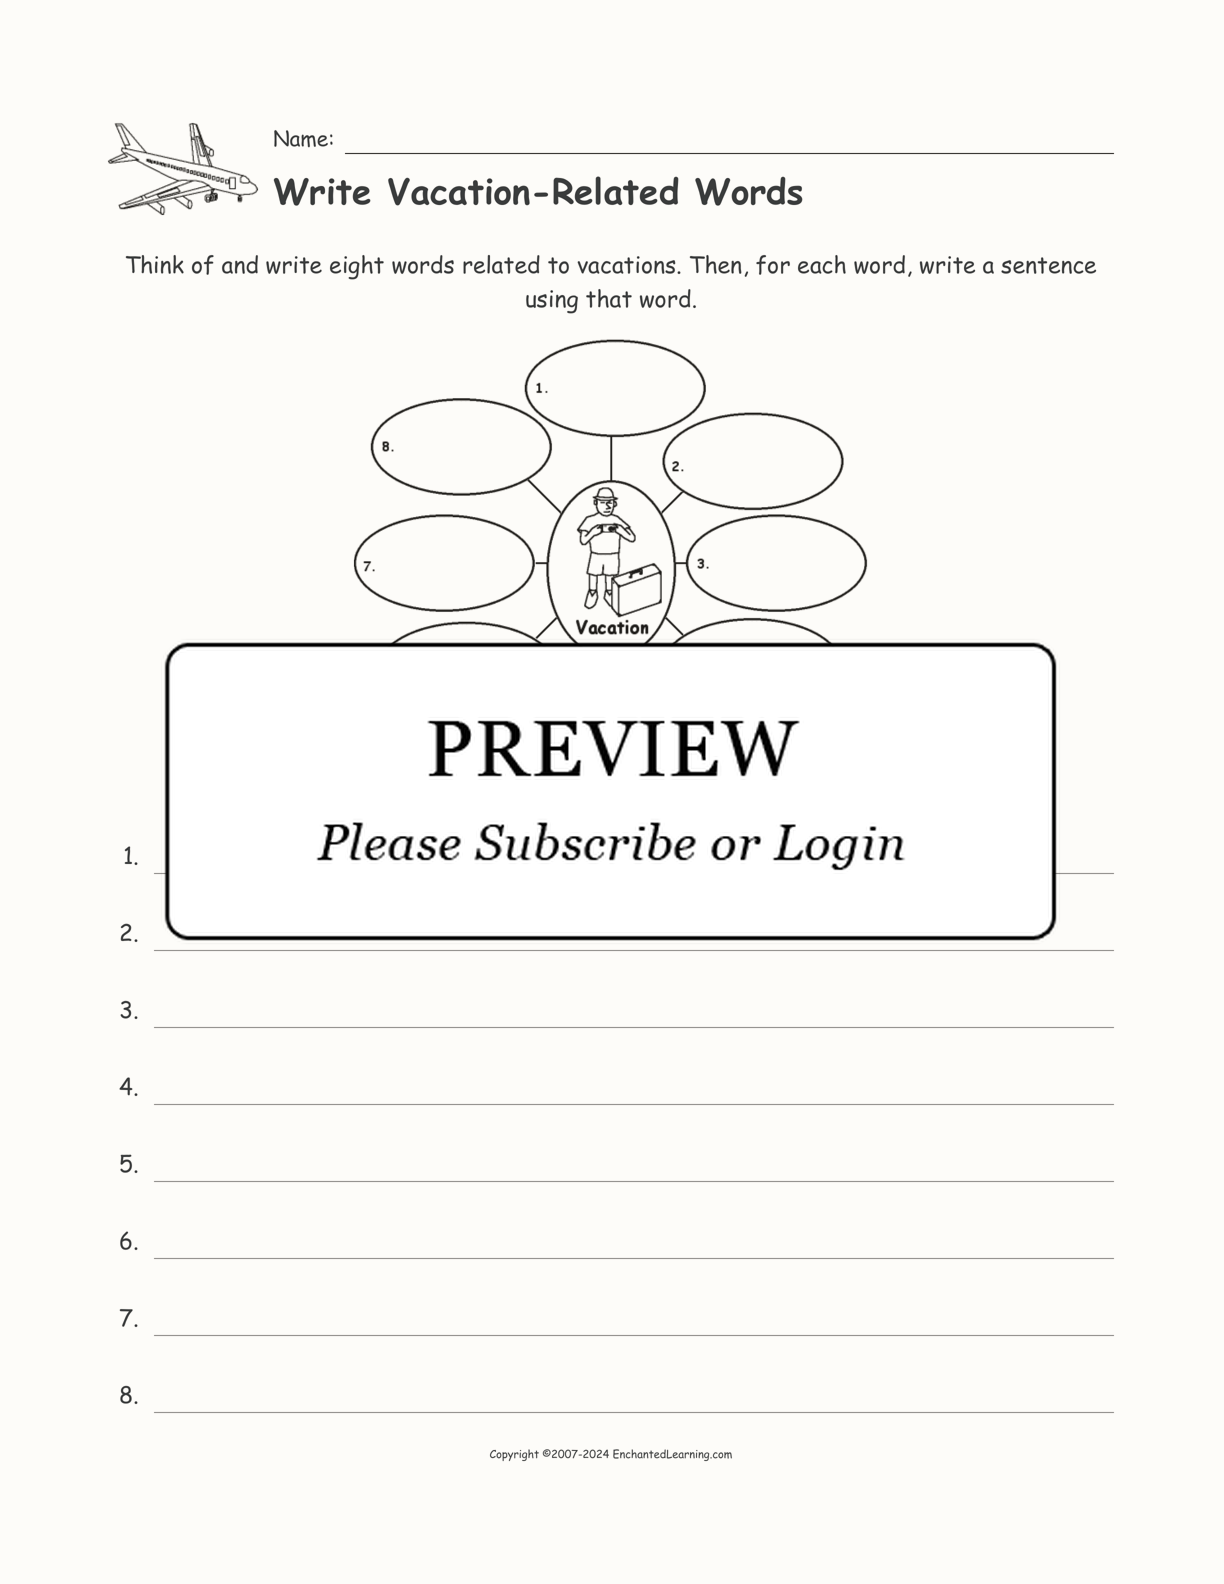 Write Vacation-Related Words interactive worksheet page 1